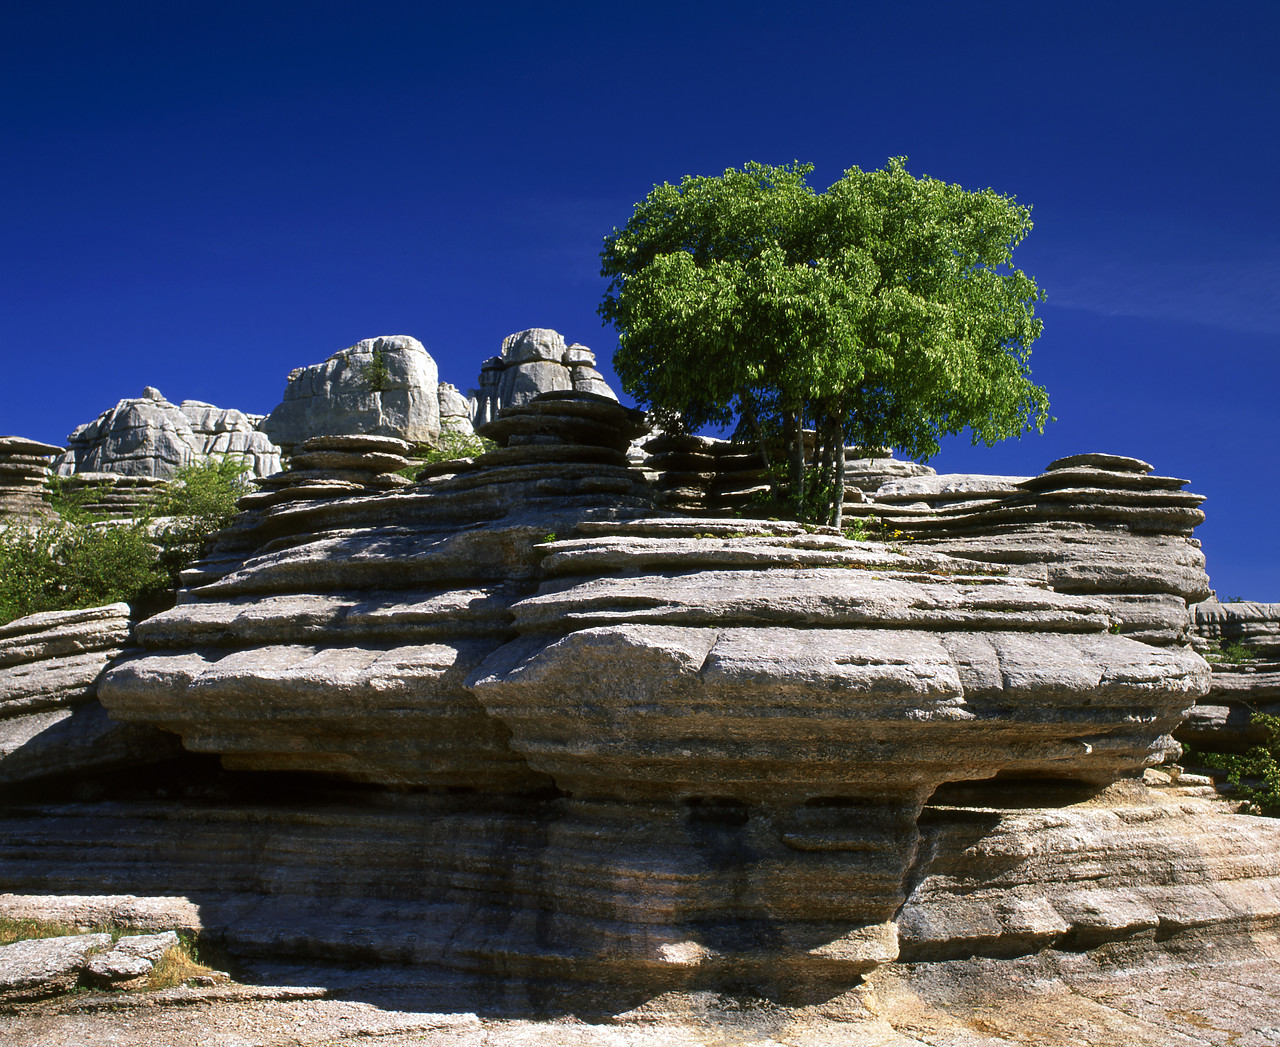 #050177-1 - Tree Growing out of Rock, El Torcal, Andalusia, Spain